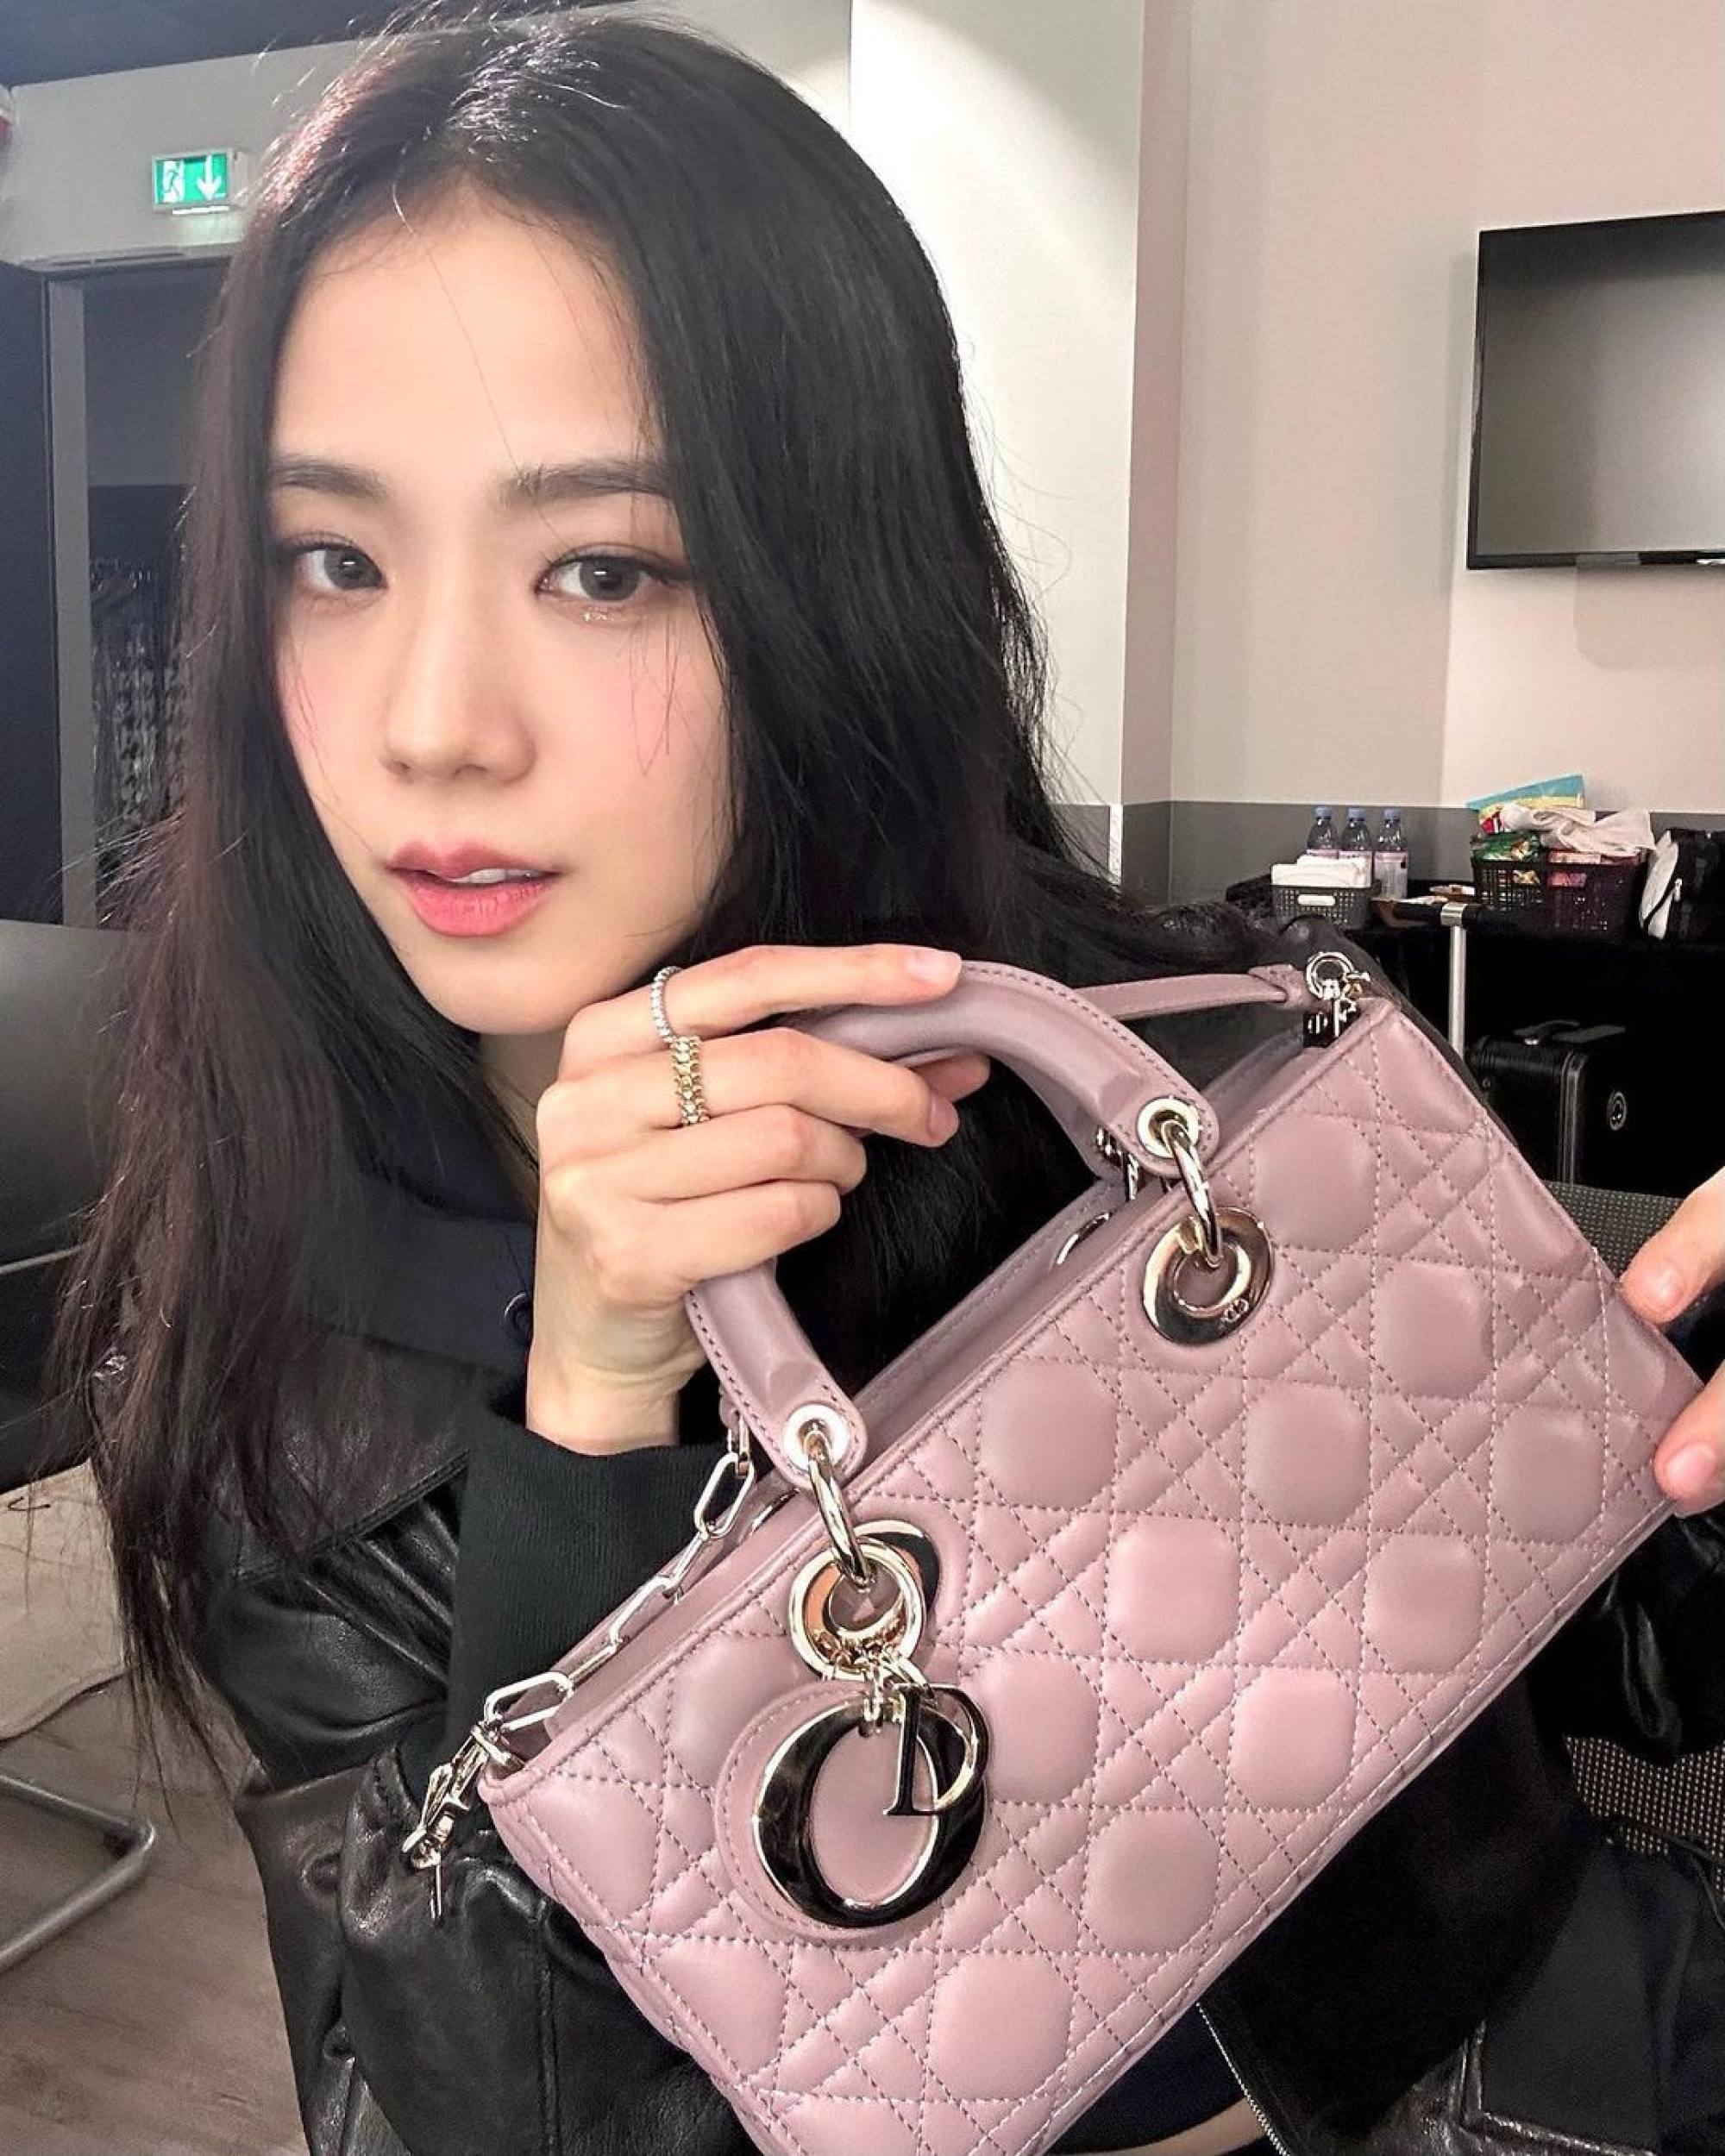 Inside Blackpink's Jisoo's Dior handbag collection: her most covetable  pieces, from the Princess Diana-inspired Lady Dior and her Hello  Kitty-decorated Lady D-Joy, to the 'It' girl staple Saddle Bag